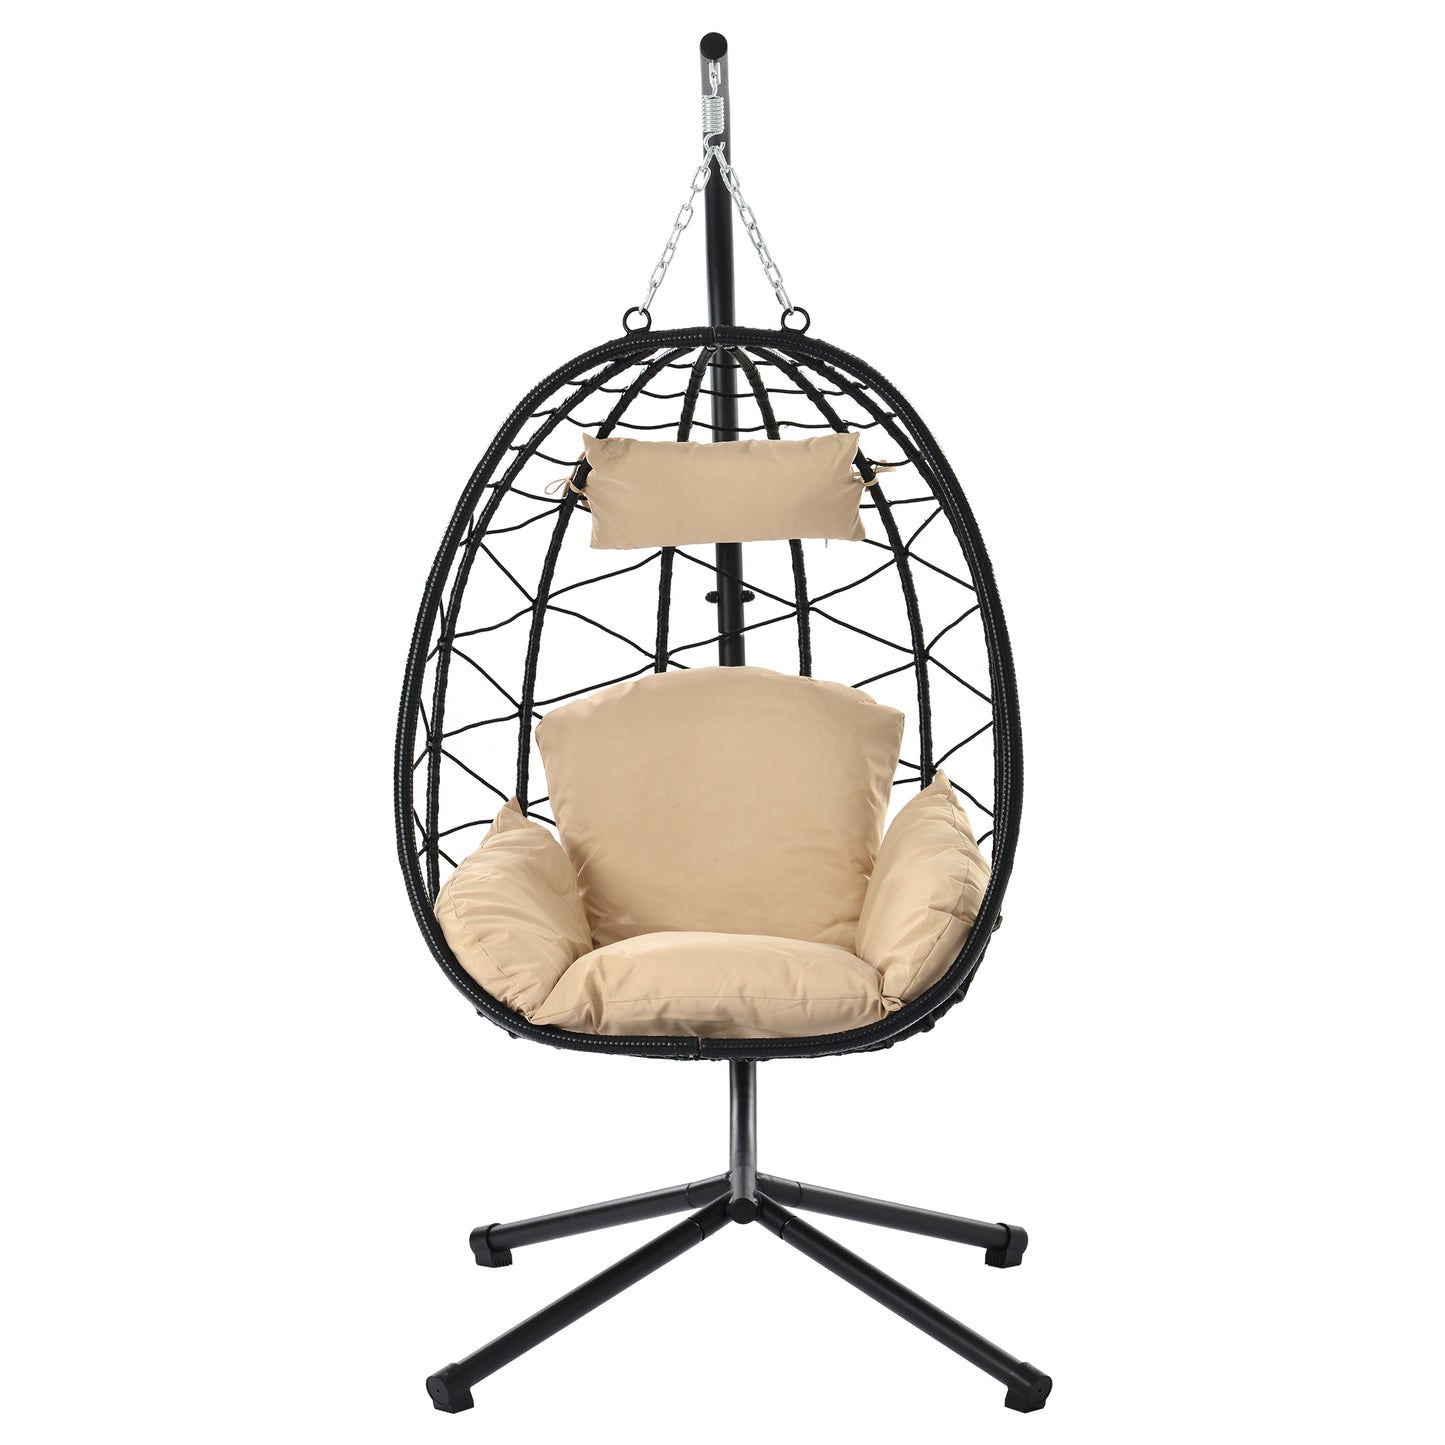 Wicker Egg Chair, Hanging Chair for Bedroom Indoor Outdoor, Swing Chair with Stand and UV Resistant Cushions for Patio Porch, Beige, LJ3811